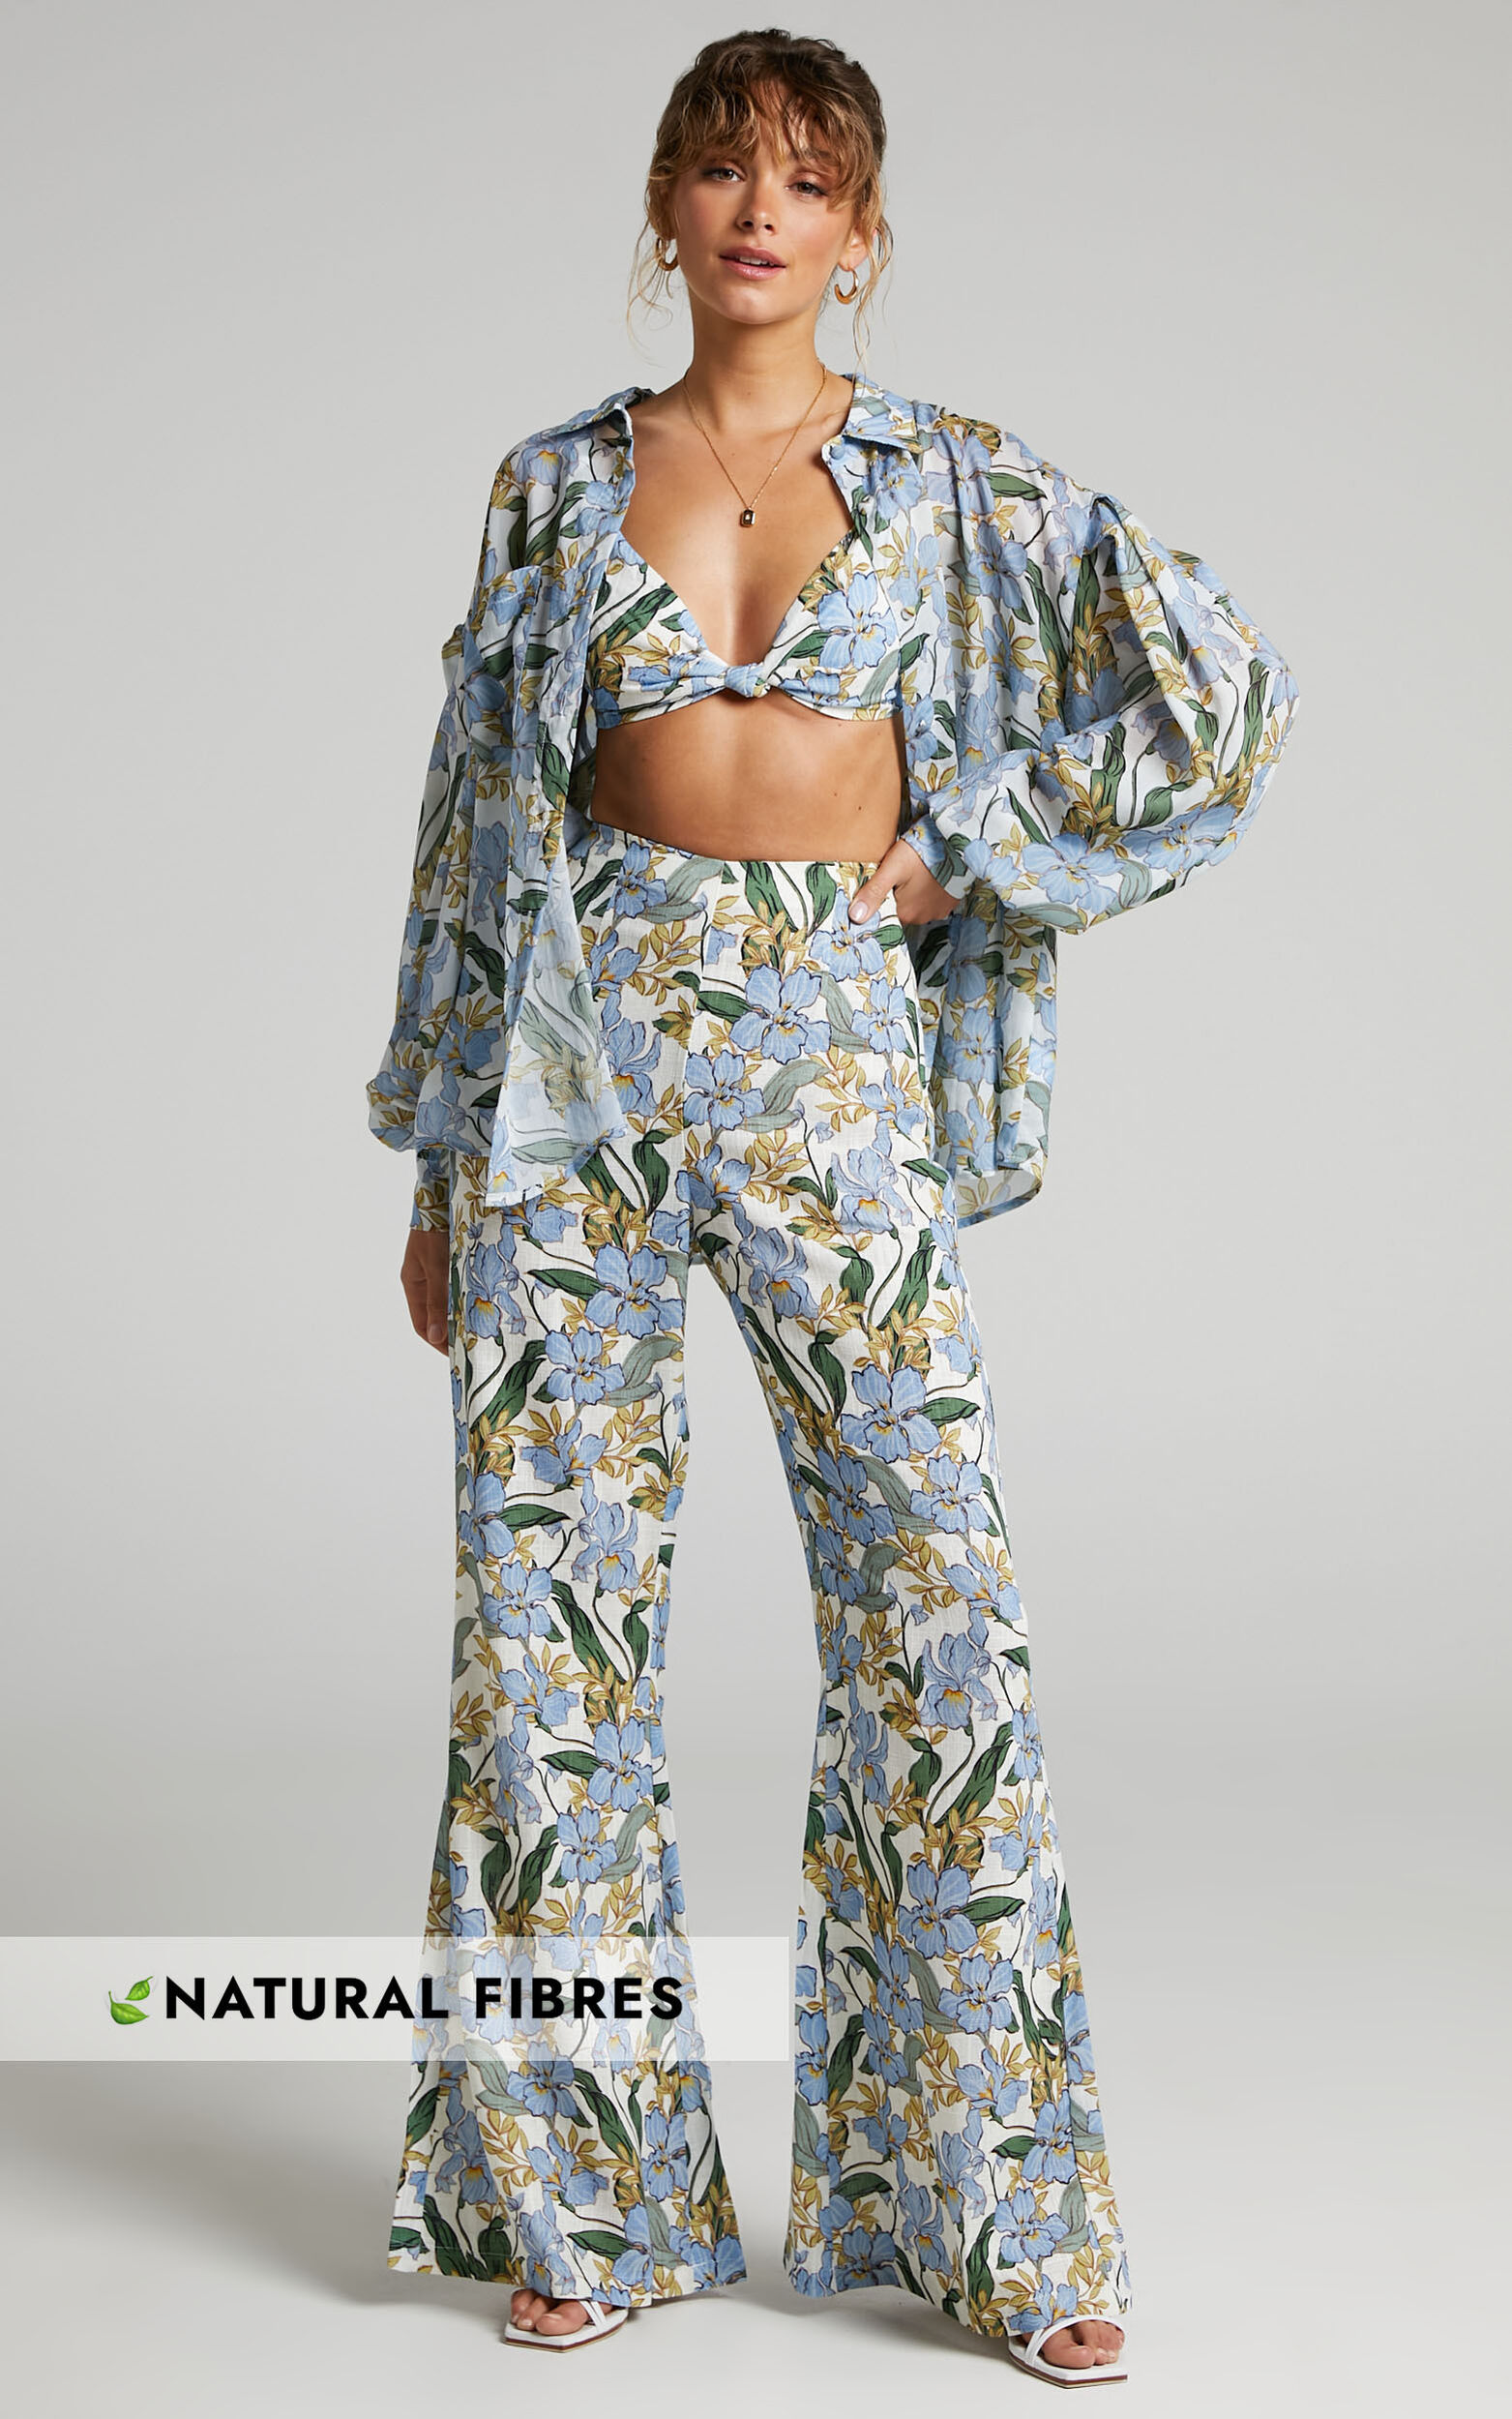 Amalie The Label - Linen Look High Waisted Laria Kick Out Flared Leg Pants in Iris Floral - 04, MLT1